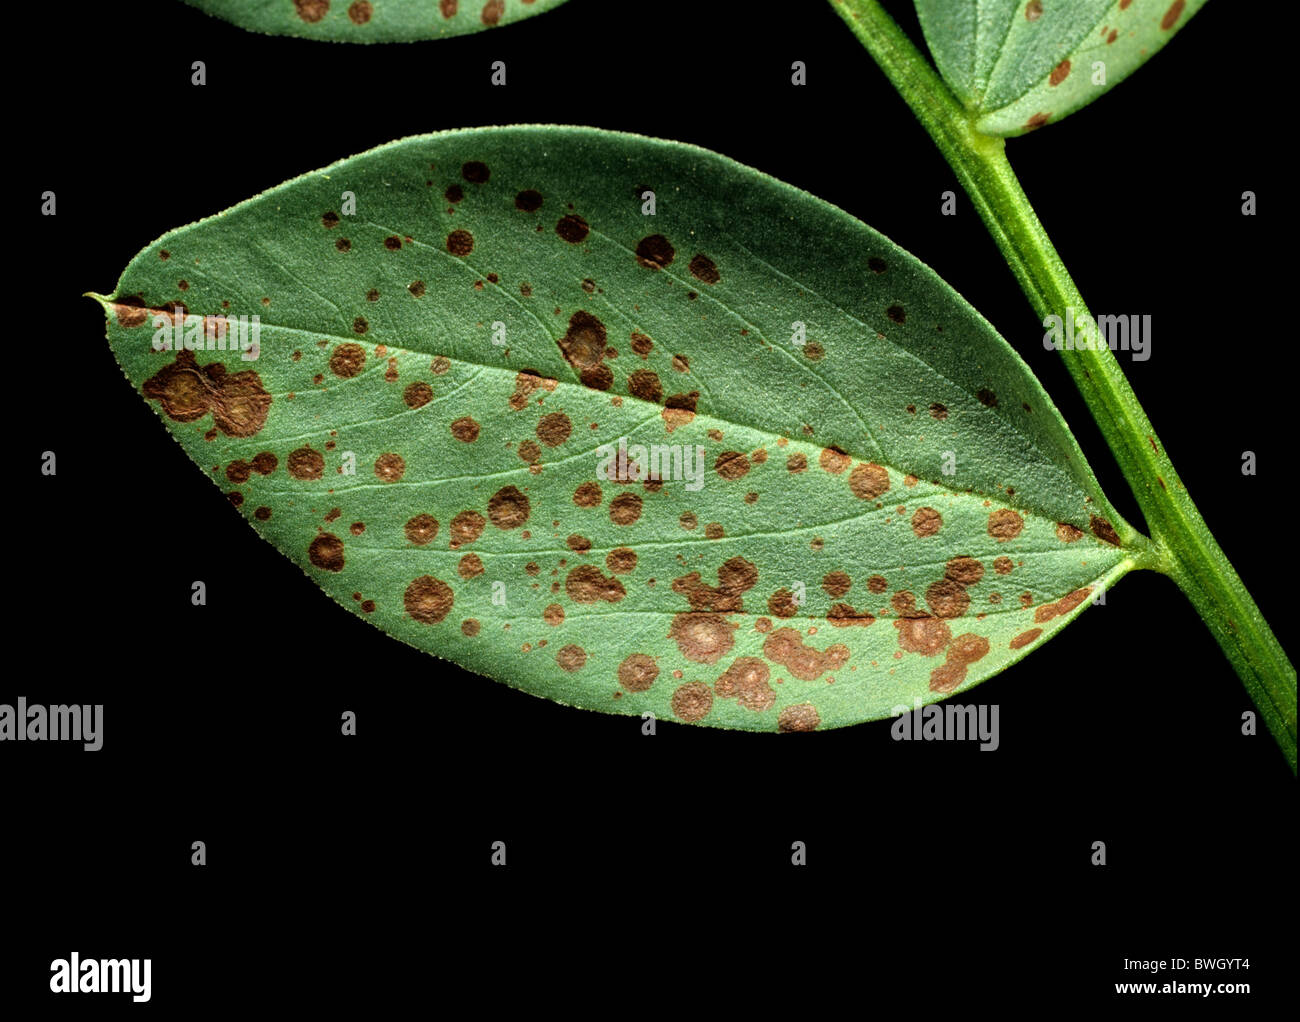 Chocolate spot (Botrytis fabae) early lesions on field bean leaf Stock Photo